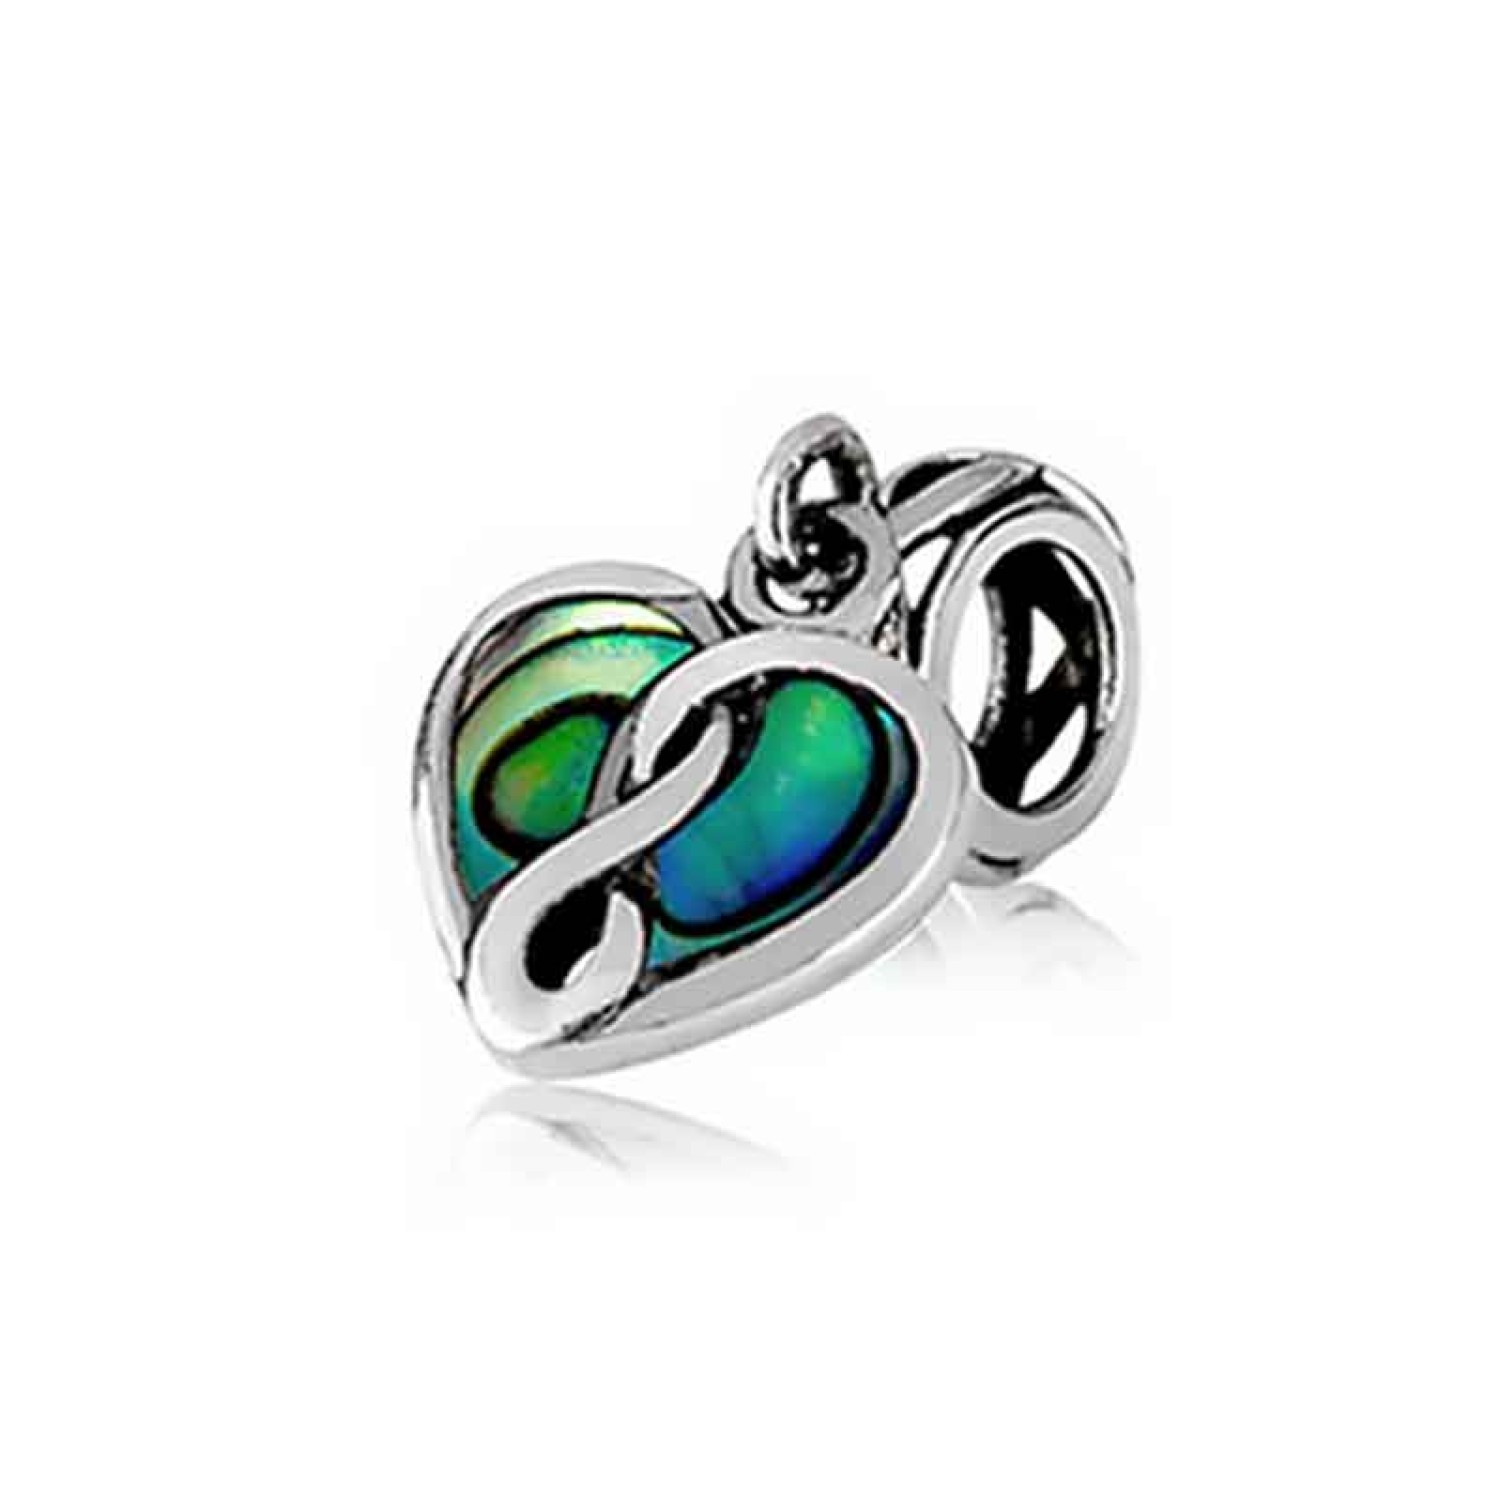 LKP007 Evolve New Zealand Eternity Paua Heart Charm. The eternity twist detailed in this exquisite pāua heart symbolises our eternal love for those we care for most. It is believed pāua strengthens the heart and New Zealand pāua is considered the rarest a